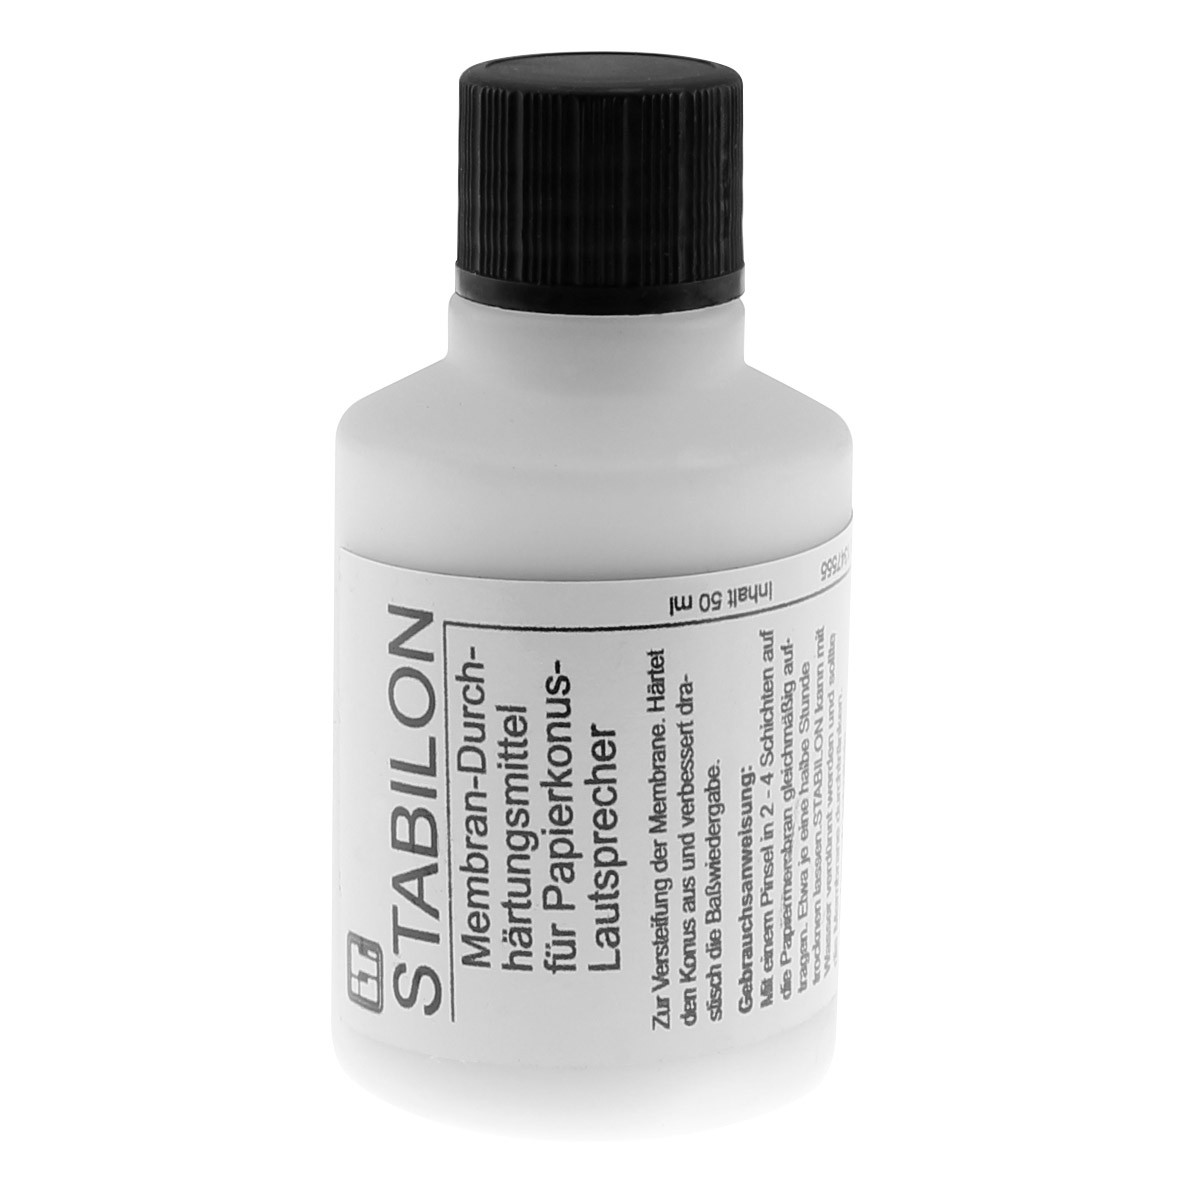 STABILON Diaphragm Hardening Lacquer for Paper Cone Drivers 50ml